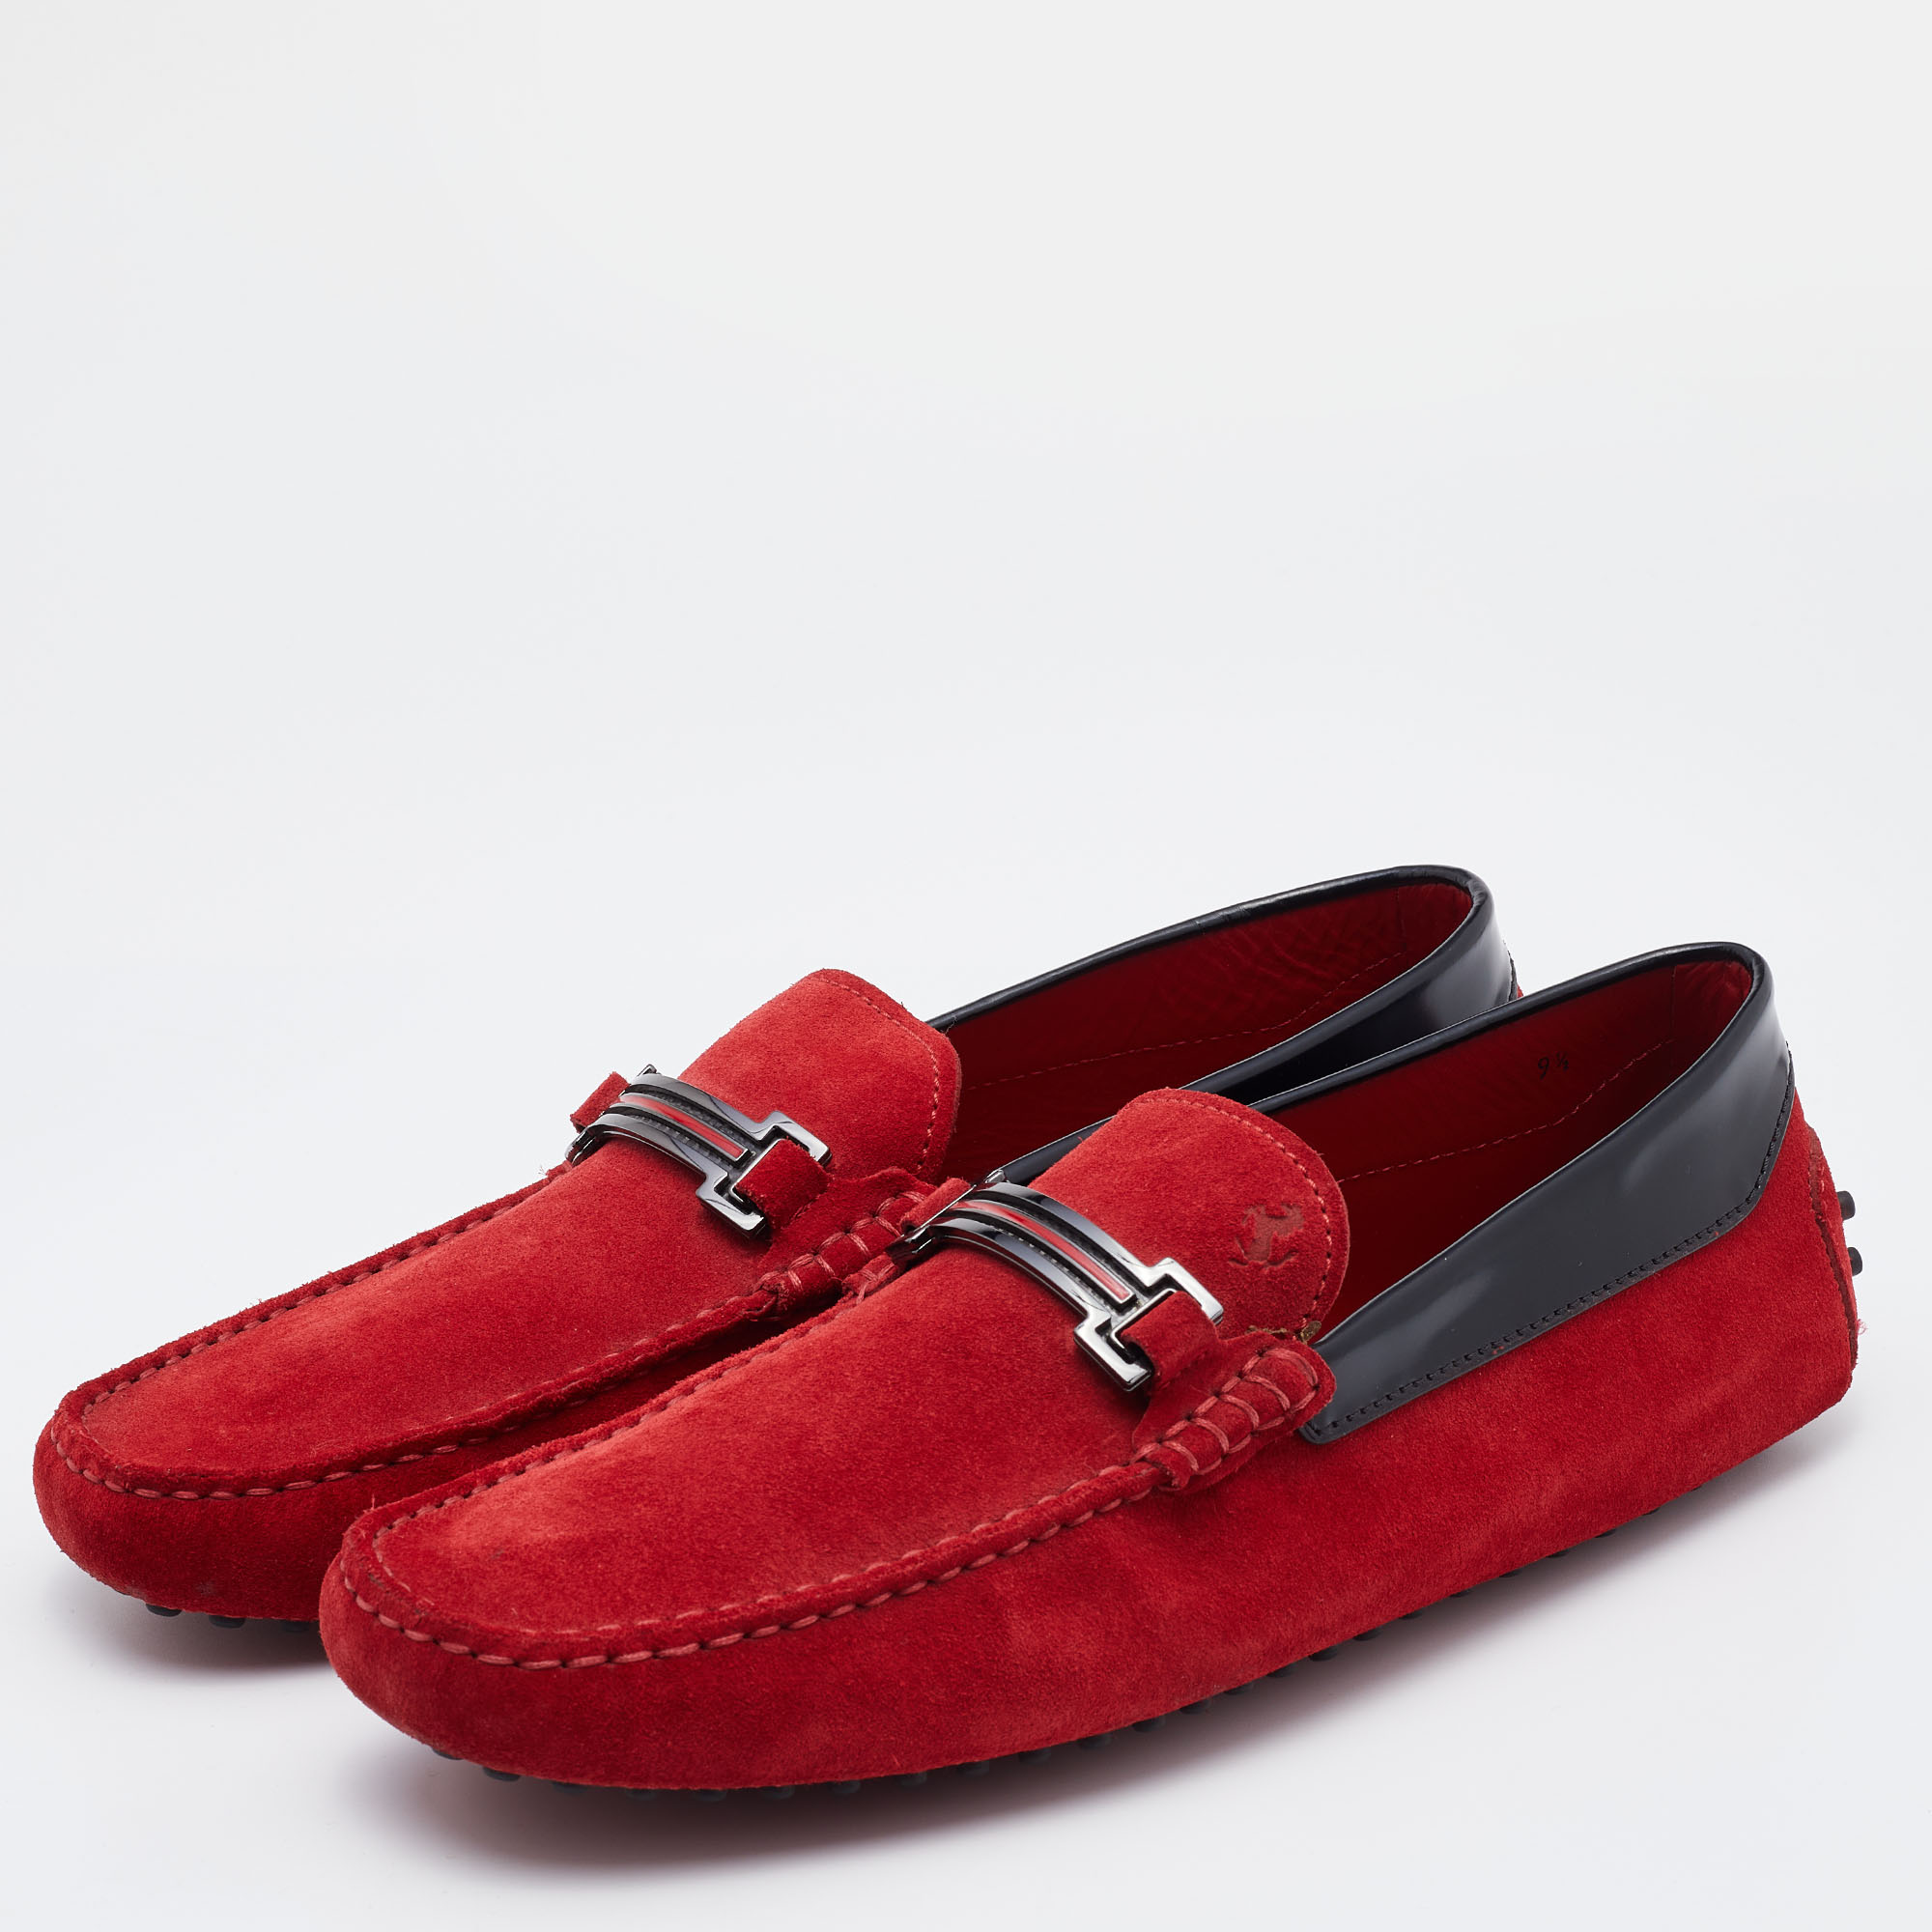 

Tod's For Ferrari Red/Black Suede Slip On Loafers Size